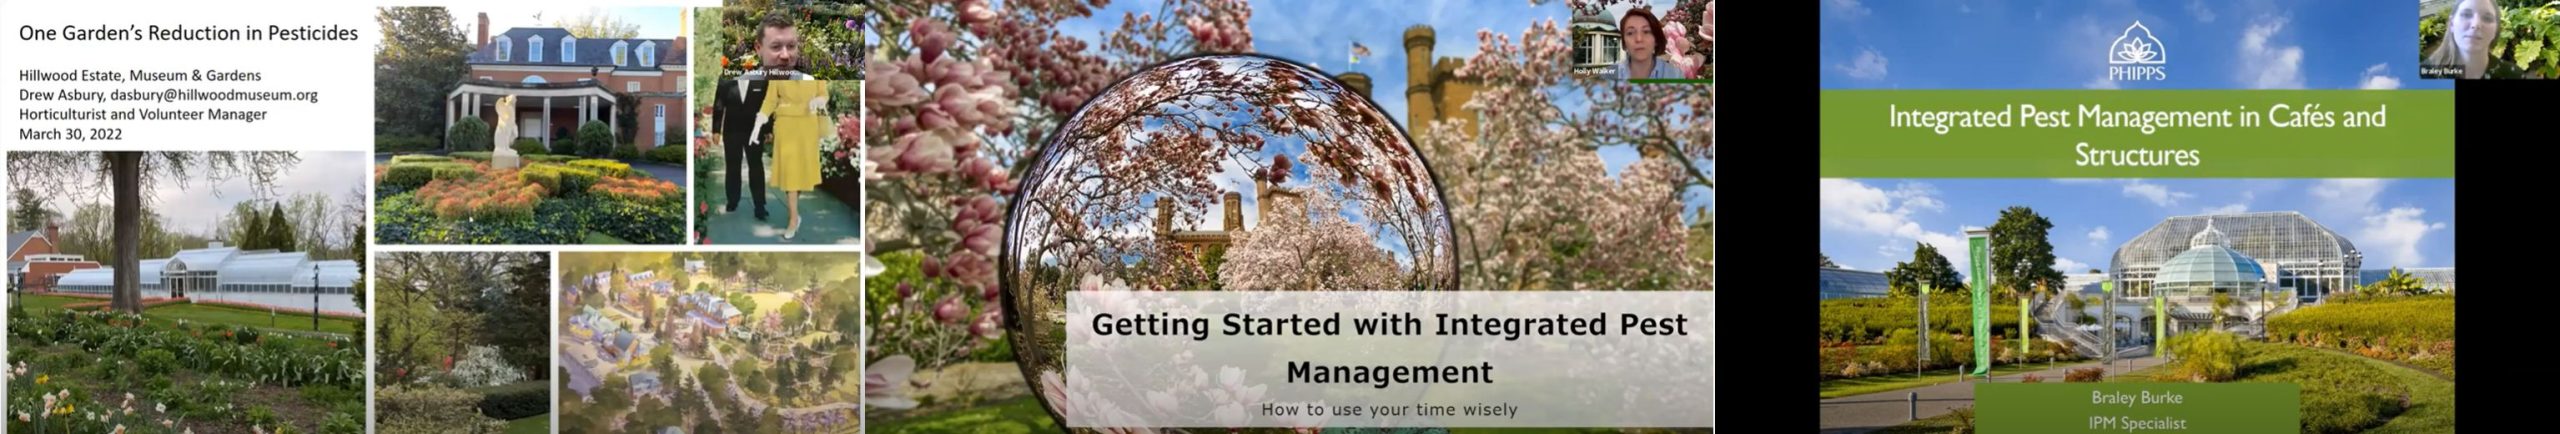 The Climate Toolkit Webinar 6: “Integrated Pest Management, Indoors and Out”